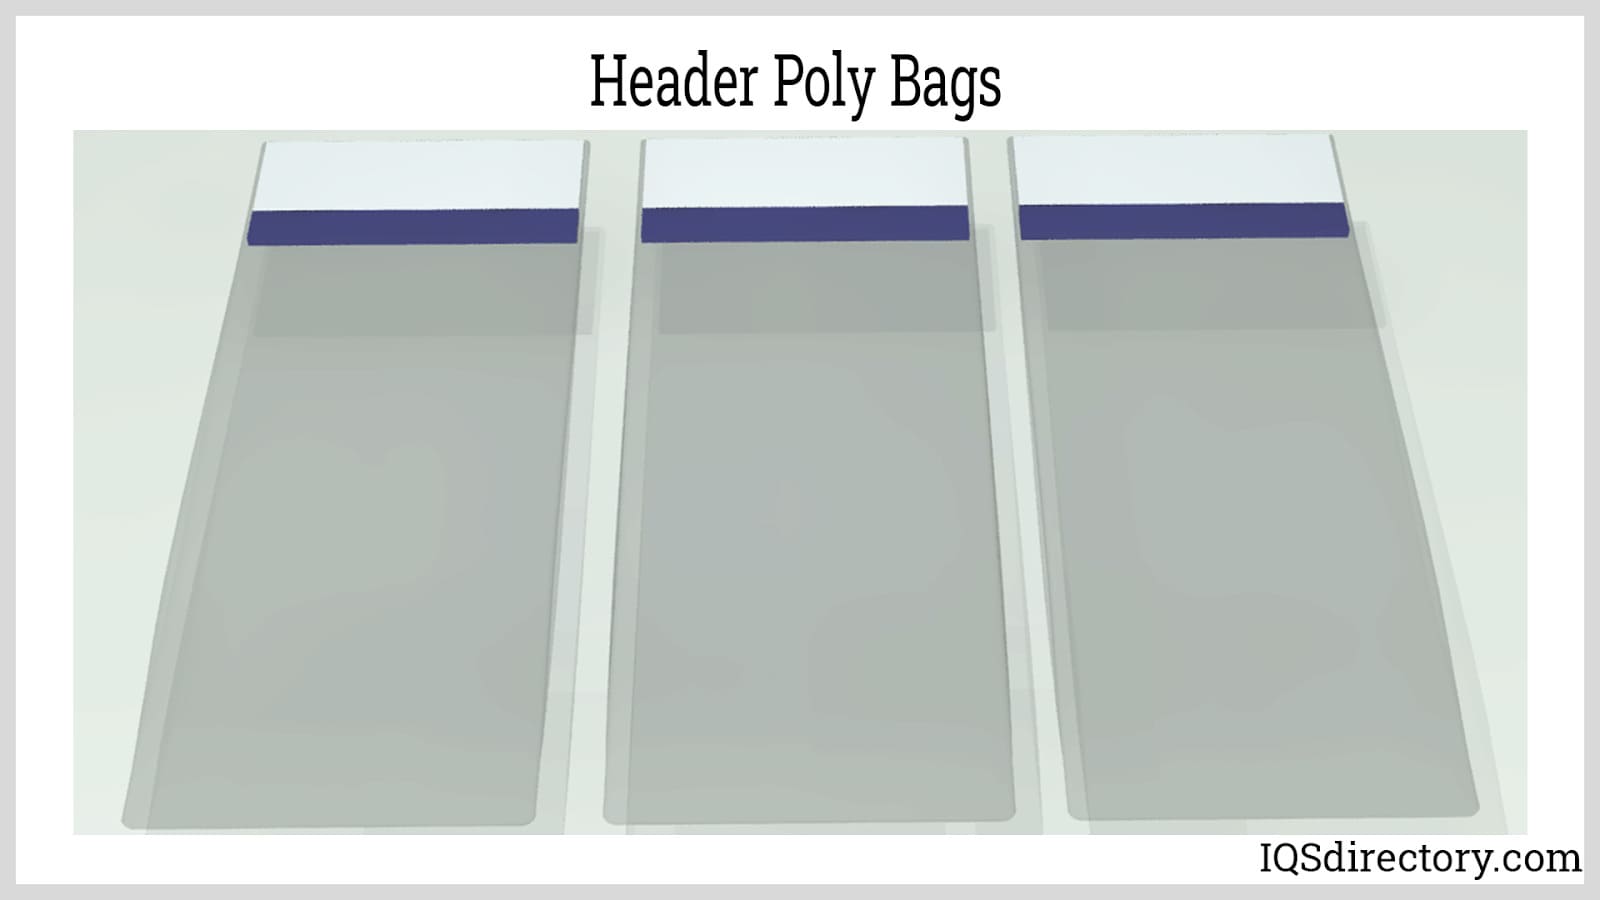 Header Poly Bags